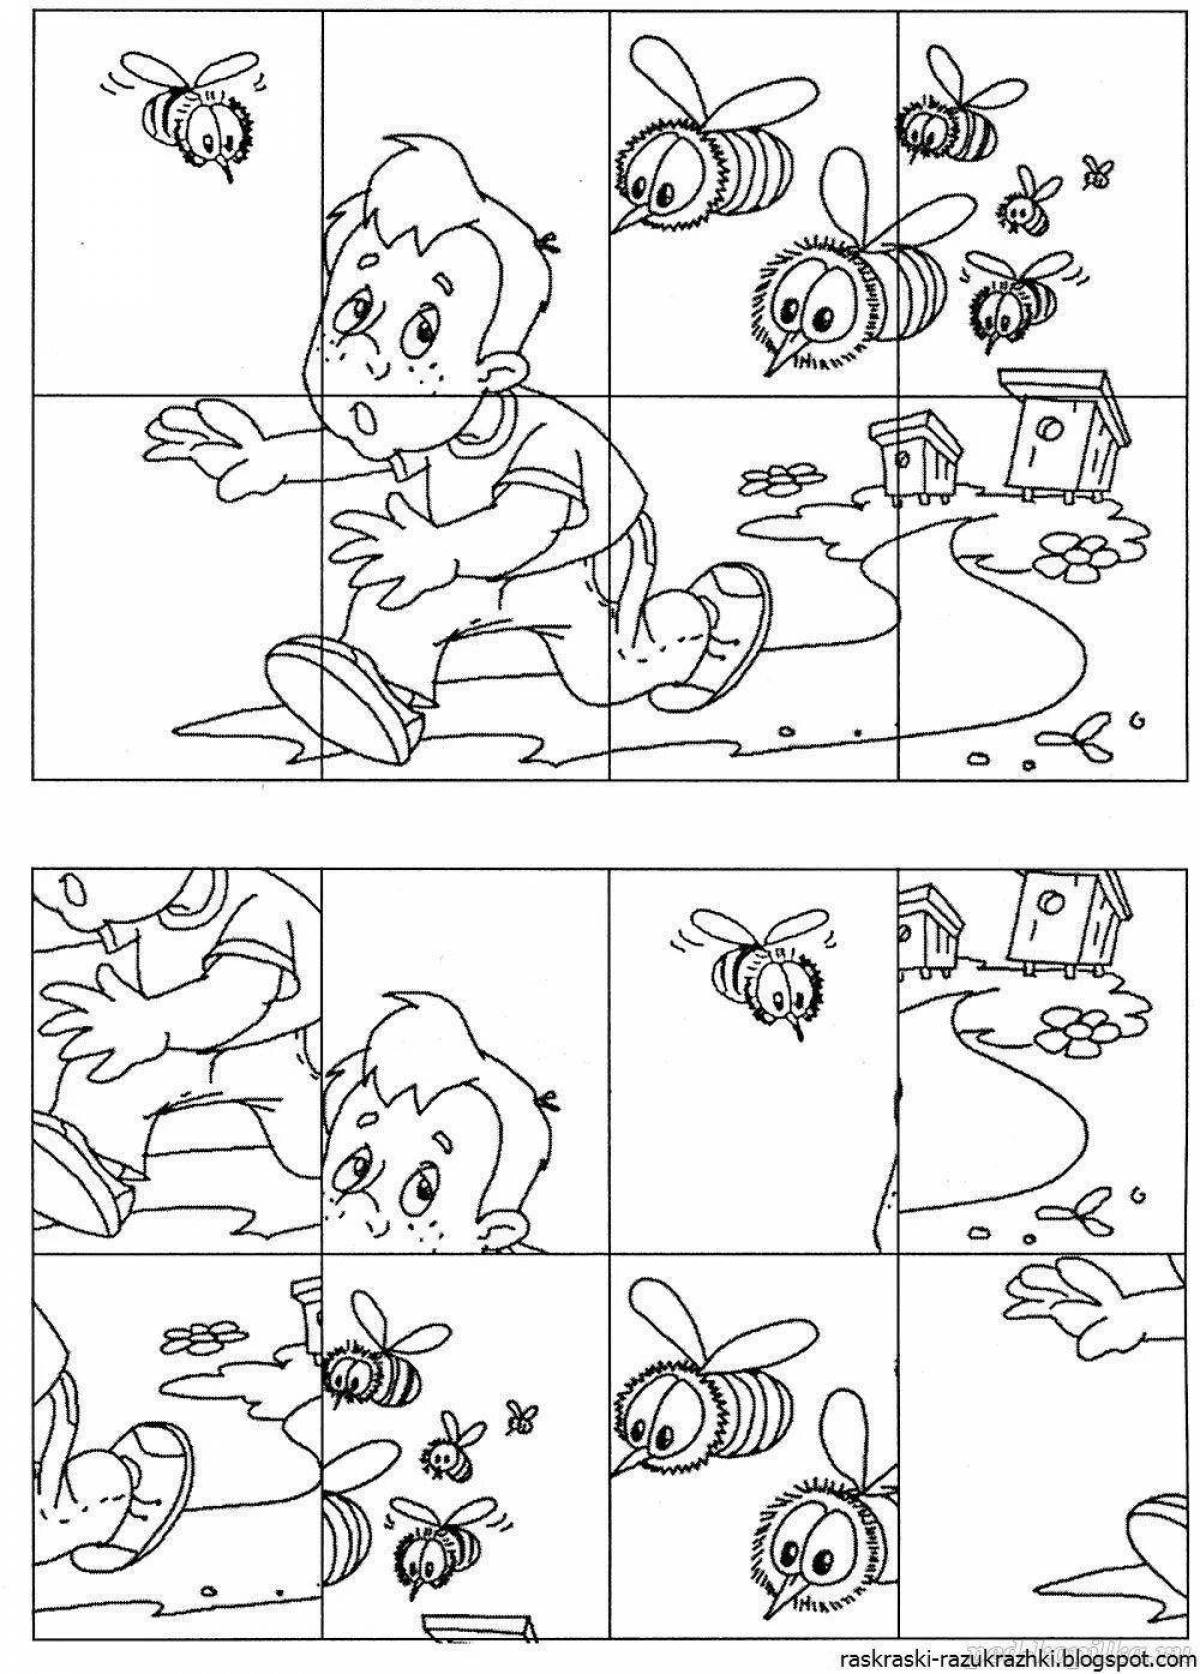 Entertaining coloring in games for children 5 years old puzzles